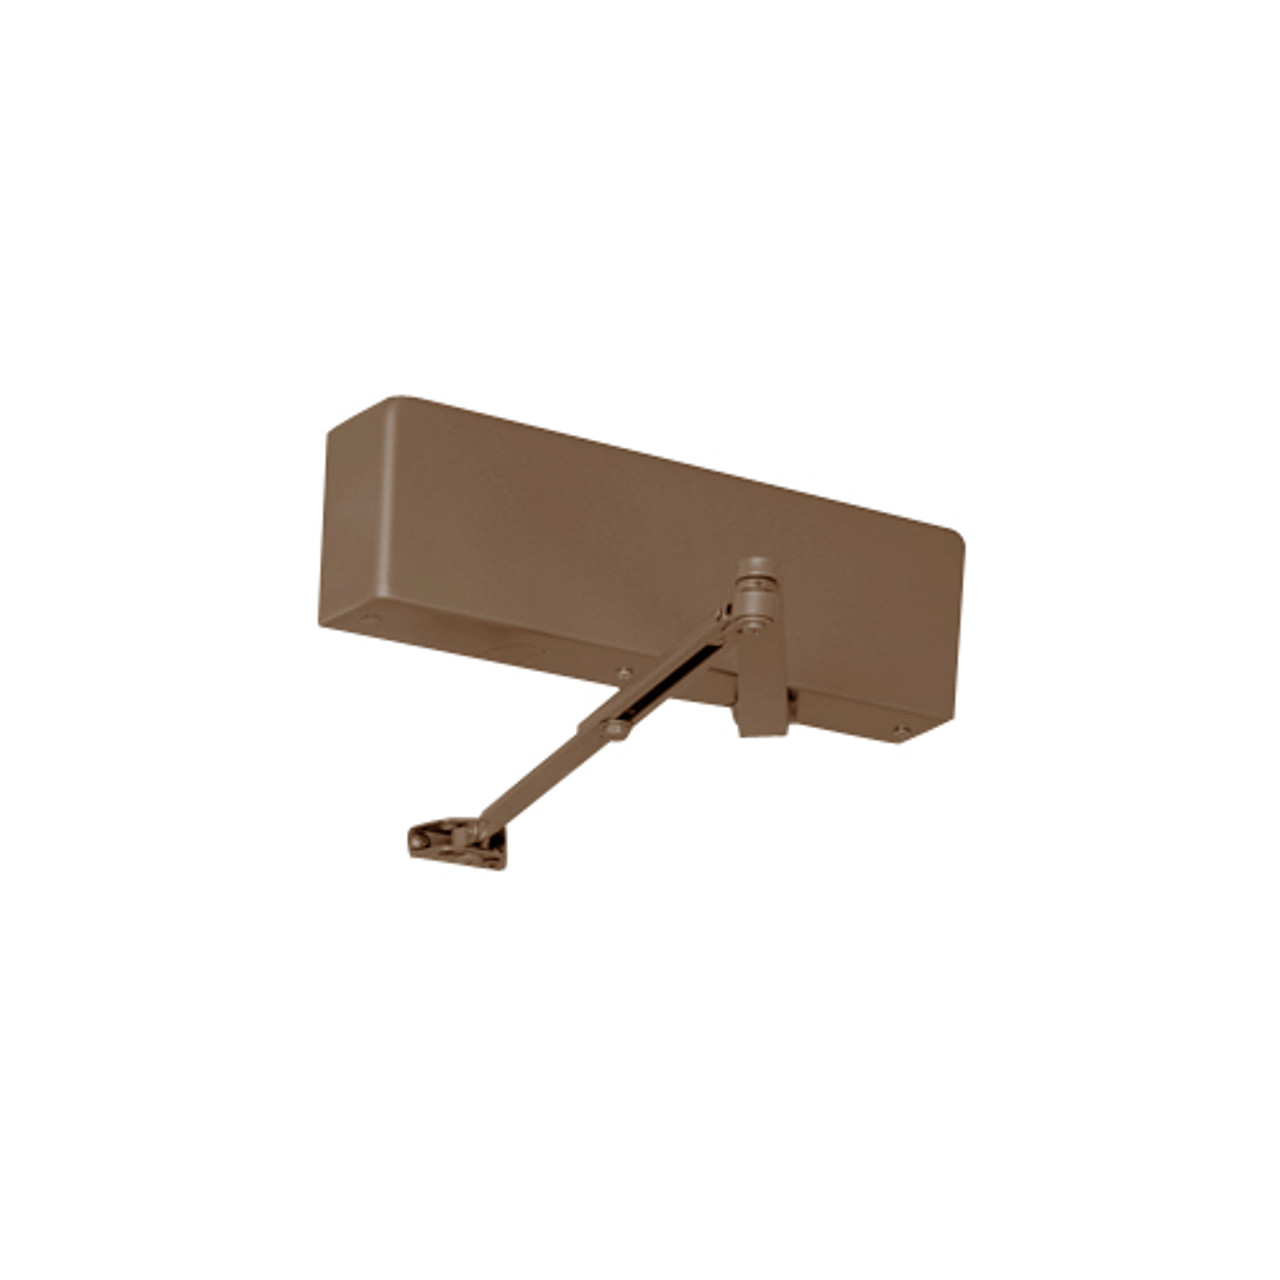 J7500M-691 Norton 7500 Series Non-Hold Open Institutional Door Closer with Top Jamb Only Reveals 2-3/4 to 7 inch to 150 Degree in Dull Bronze Finish